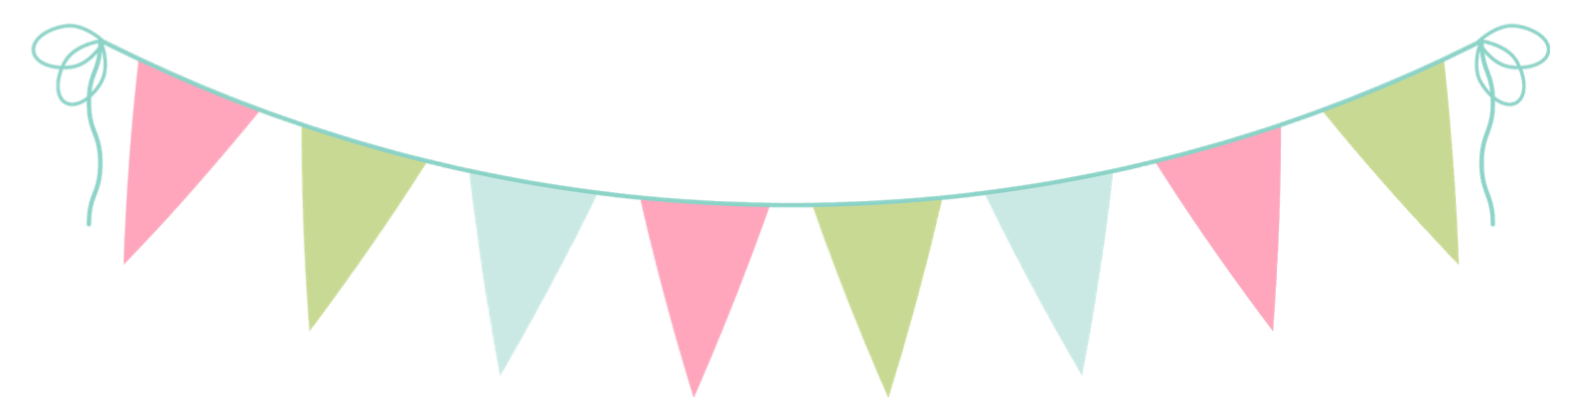 Pennant Banner Clipart | Free download on ClipArtMag